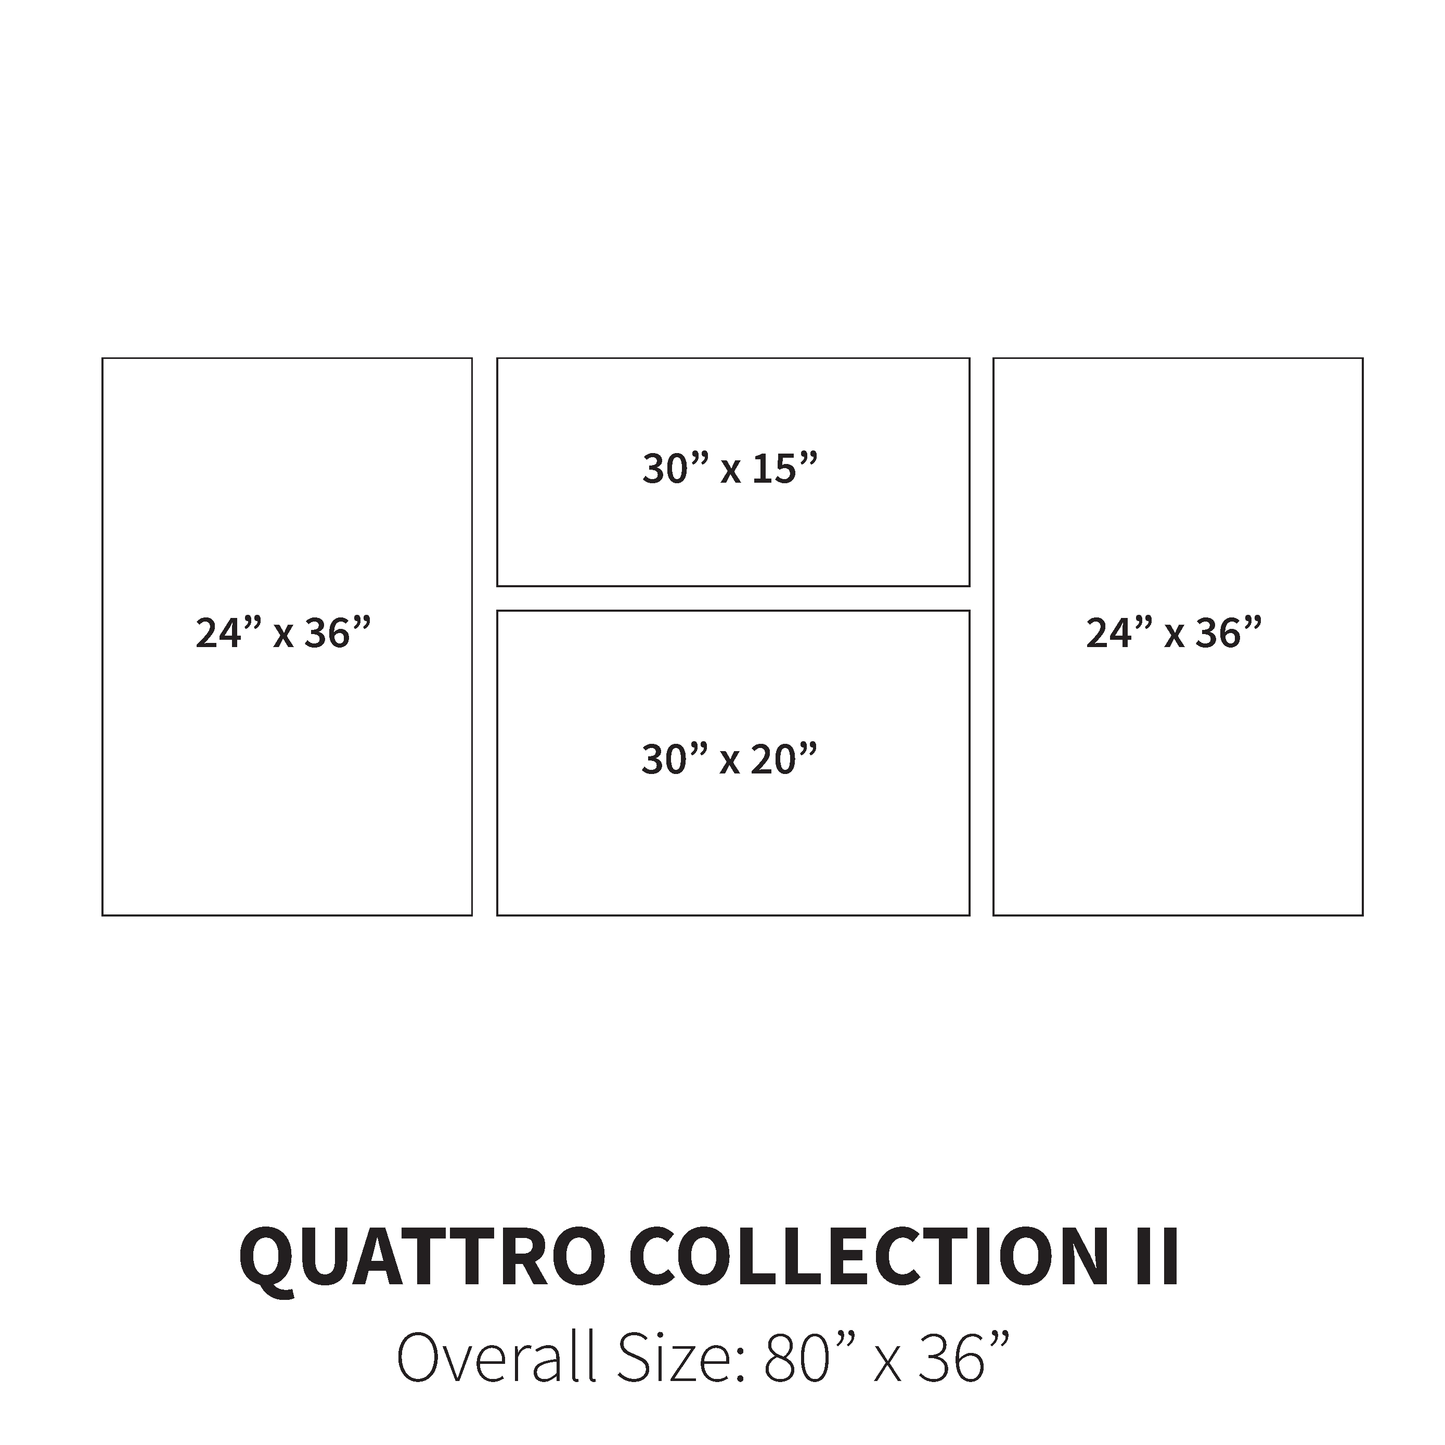 Quattro Collection II (Overall Size: 80" x 36")